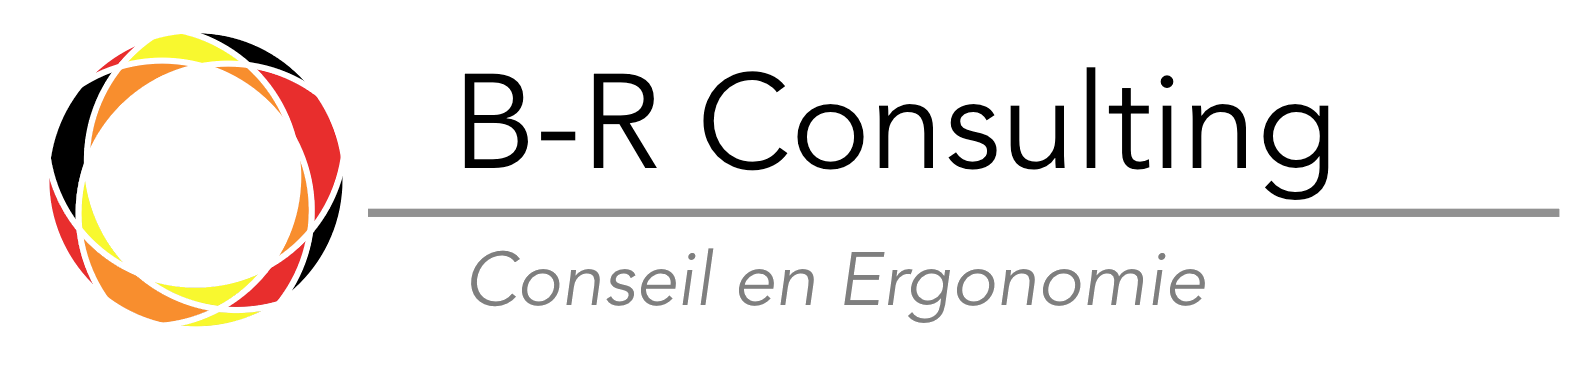 BR Consulting Services